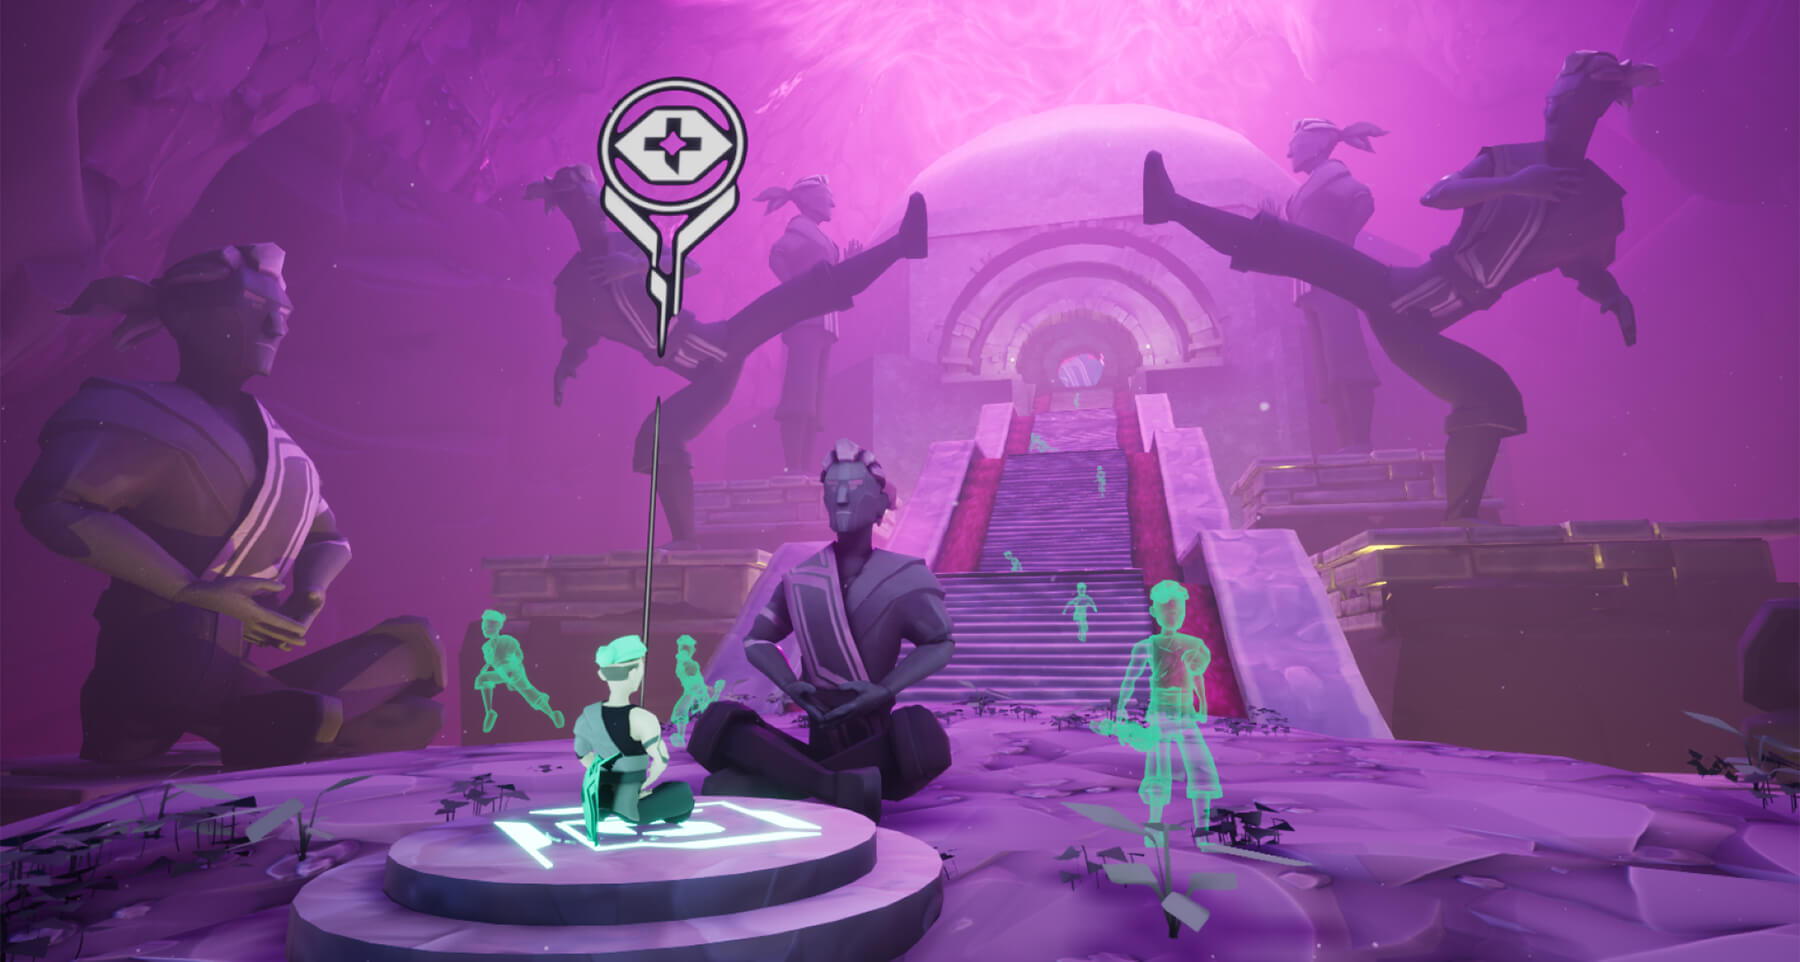 Game screenshot showing a monk meditating at the base of a stairway leading to a stone temple, surrounded by phantom figures